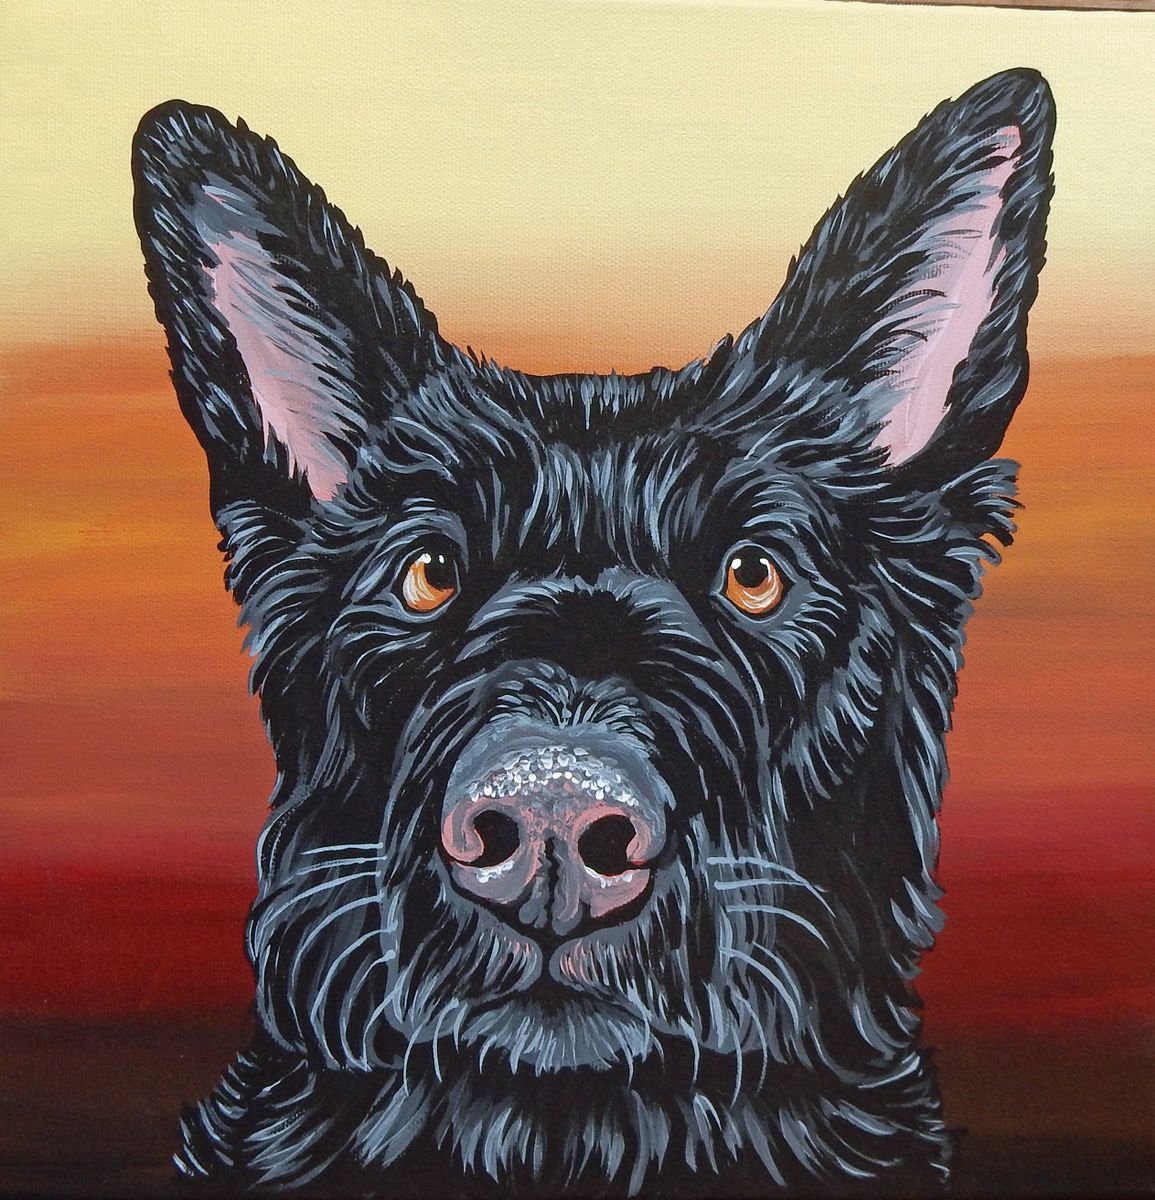 Black Shepherd Pet Dog Original Art Painting-12 x 12 Inch Stretched Canvas-Carla Smale by carla smale